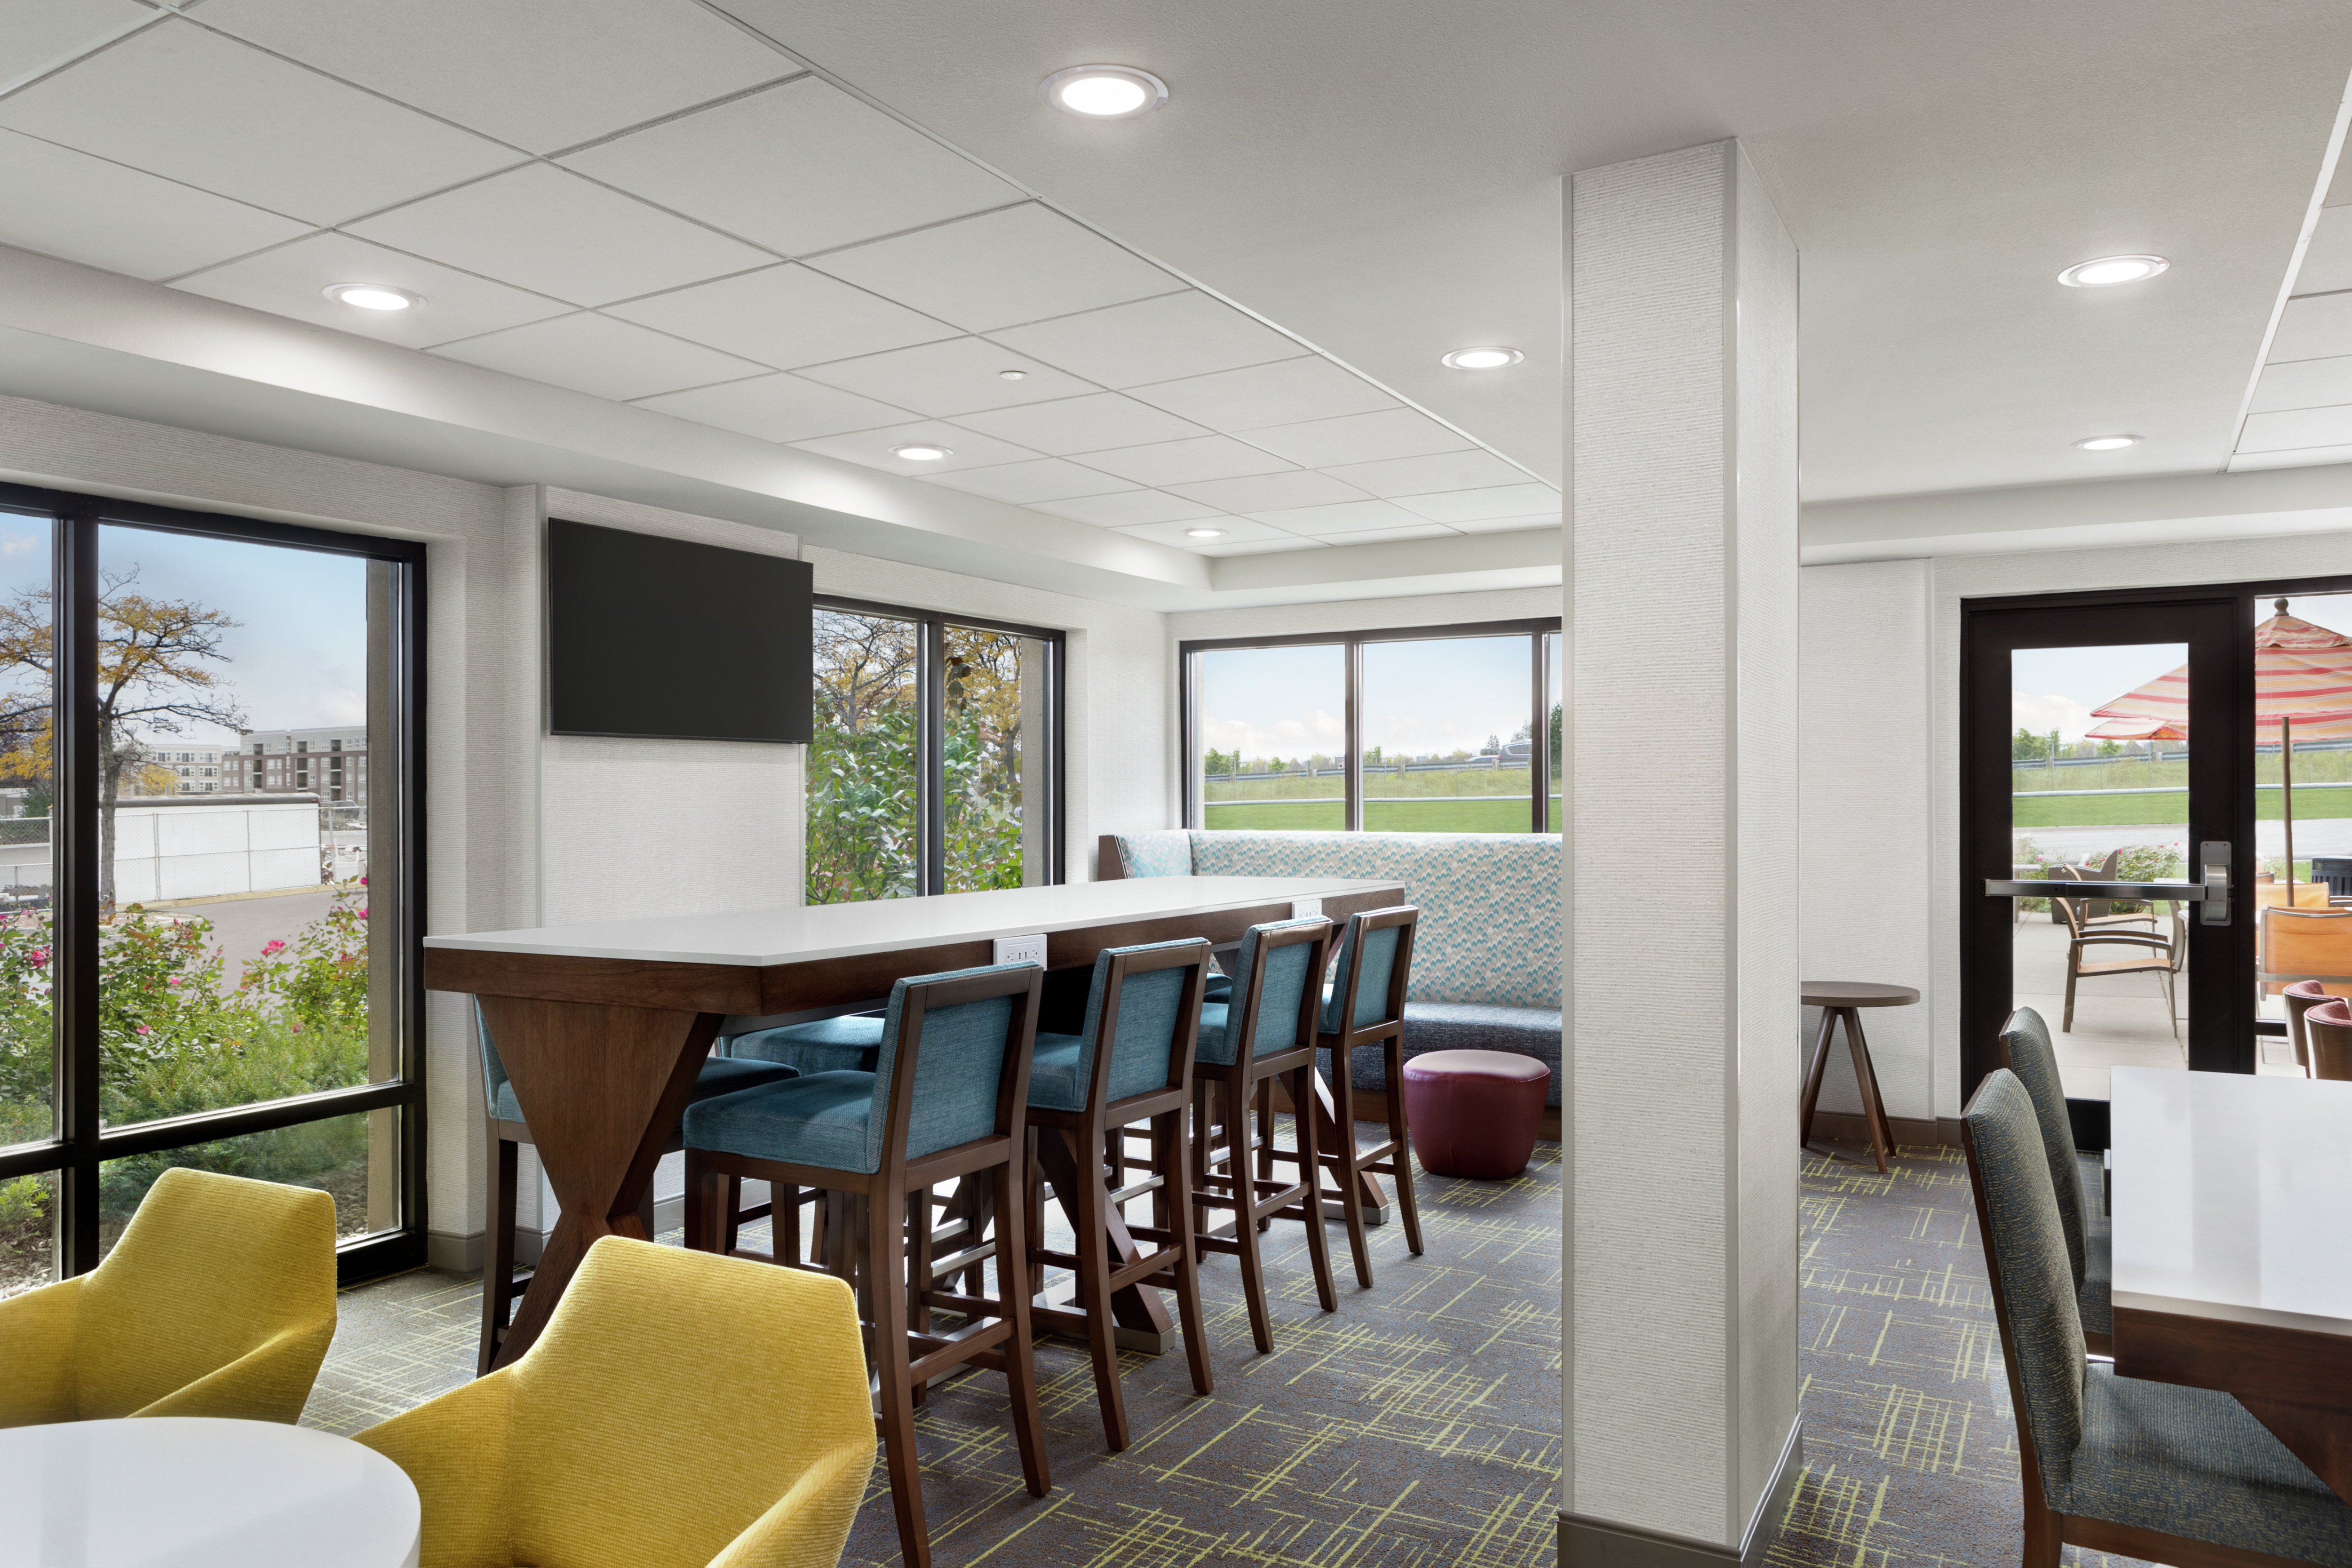 Spacious hotel lobby featuring ample seating, communal table, and large windows with natural light.